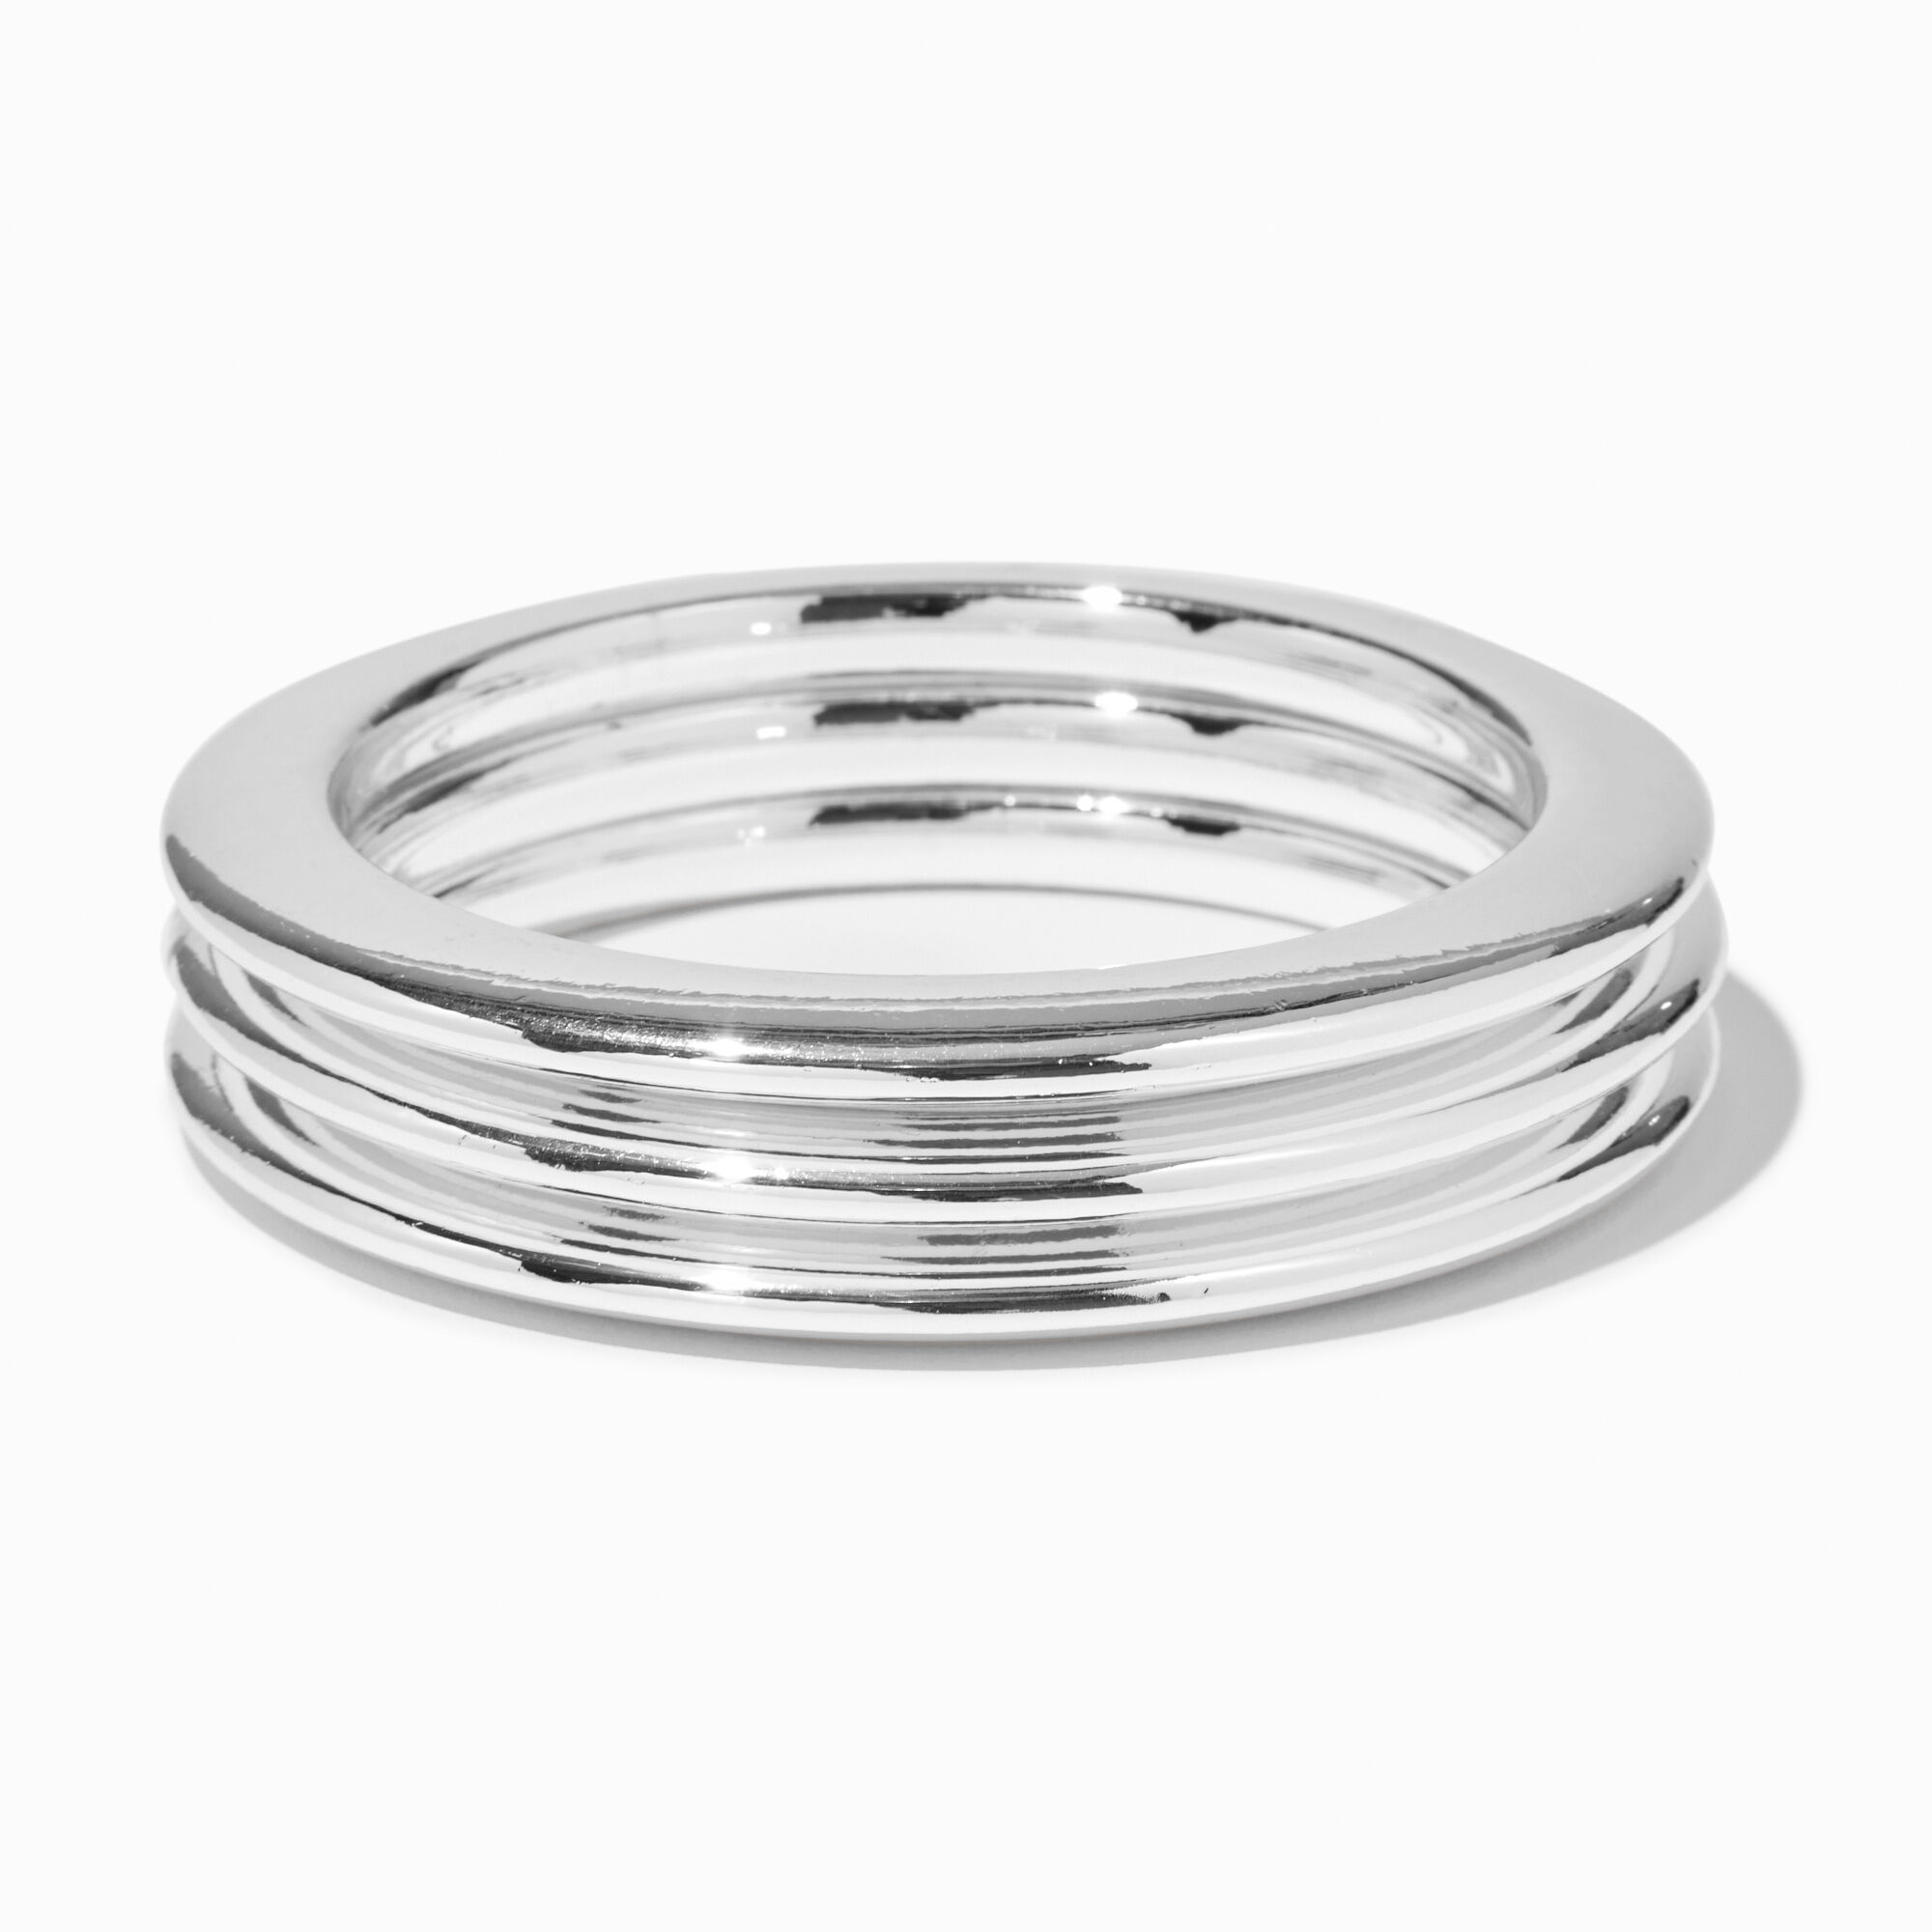 View Claires Shiny Tone Bangle Bracelets 3 Pack Silver information